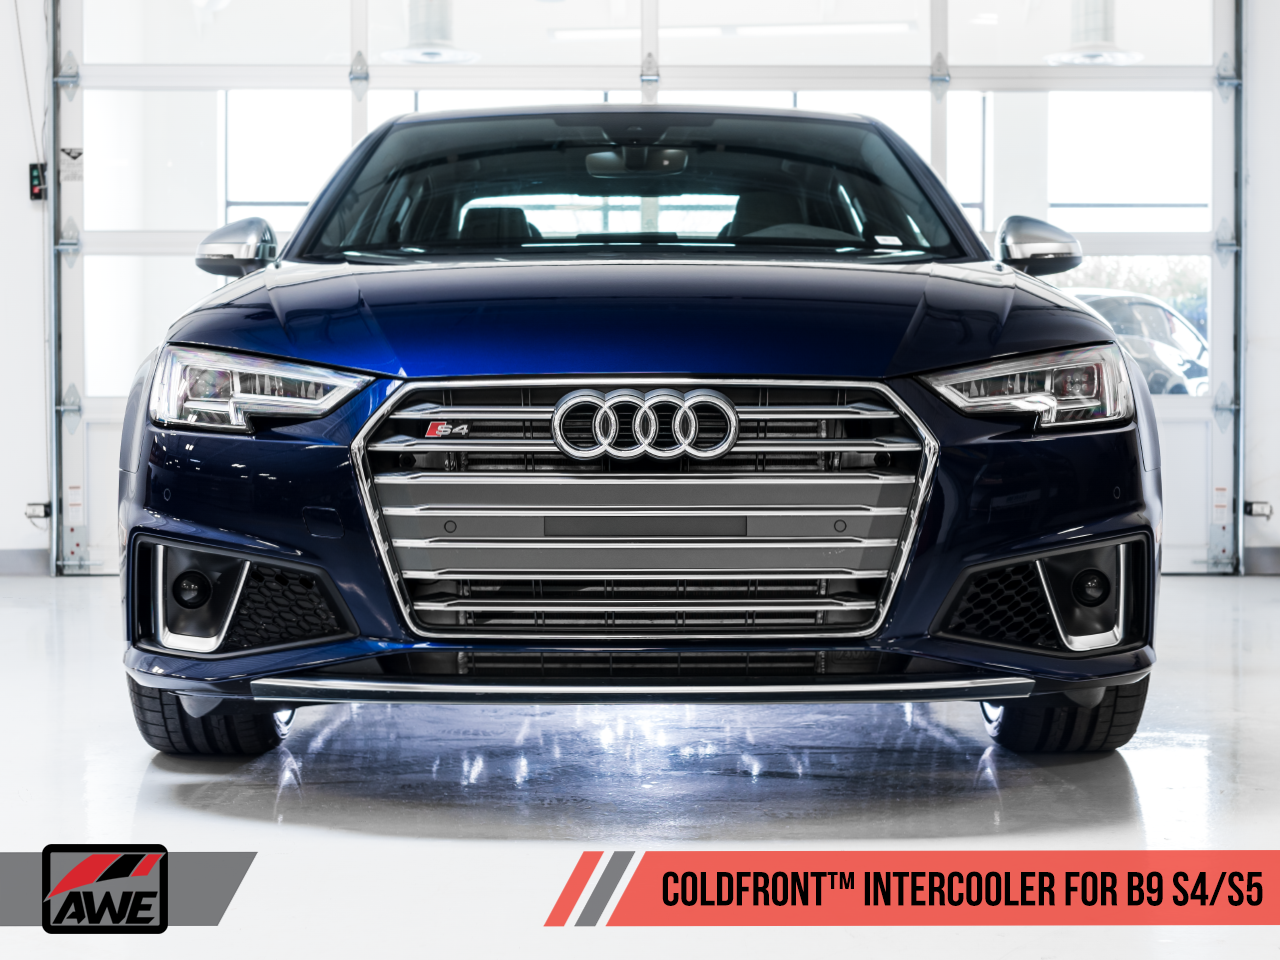 AWE ColdFront™ Intercooler for the Audi B9 S4 / S5 3.0T - 0